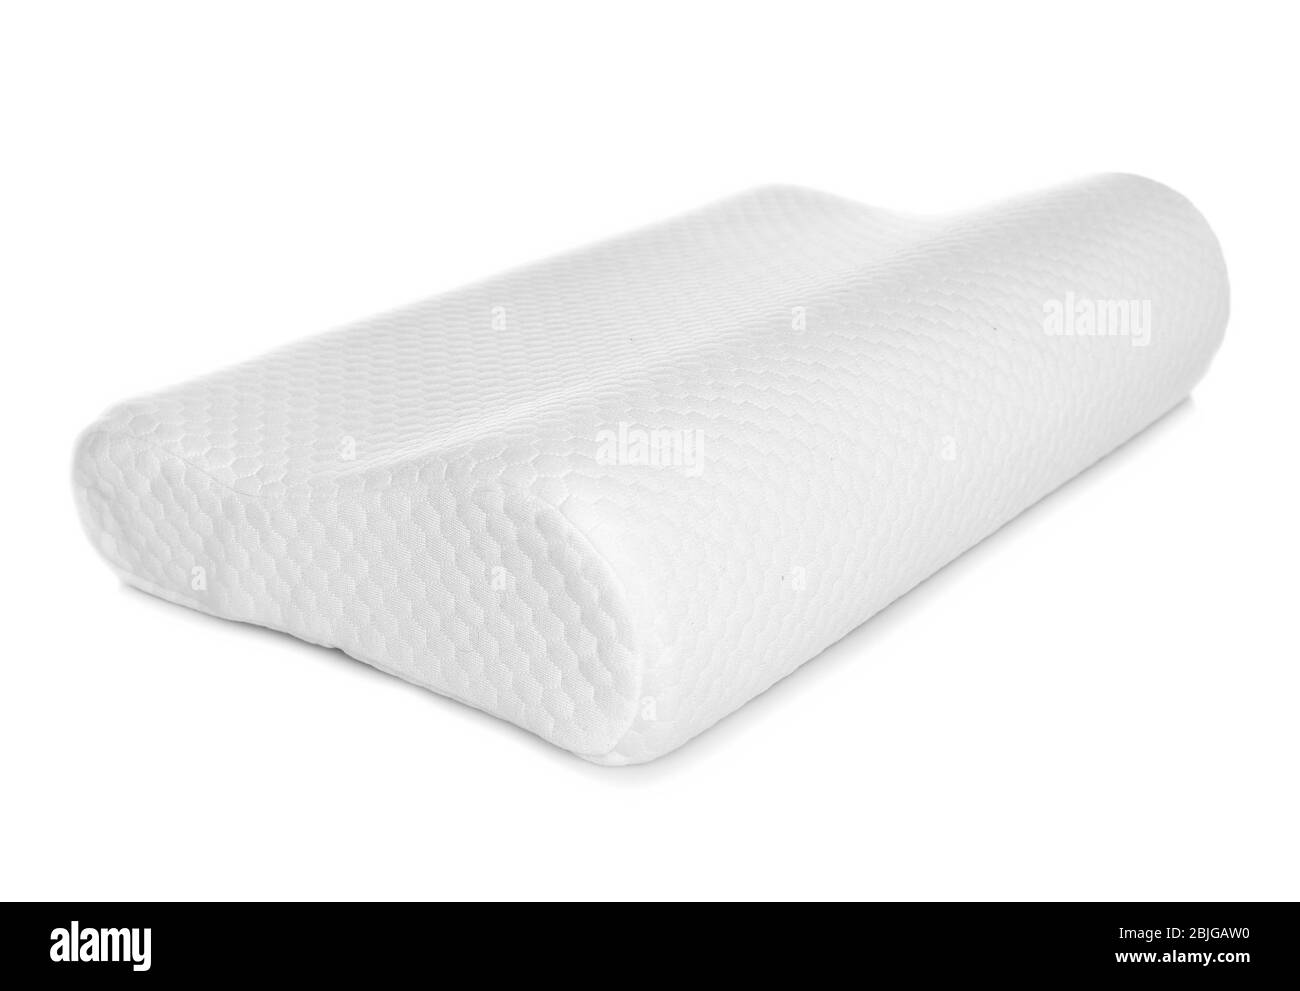 Orthopedic pillow on white background. Physiotherapy concept Stock Photo -  Alamy